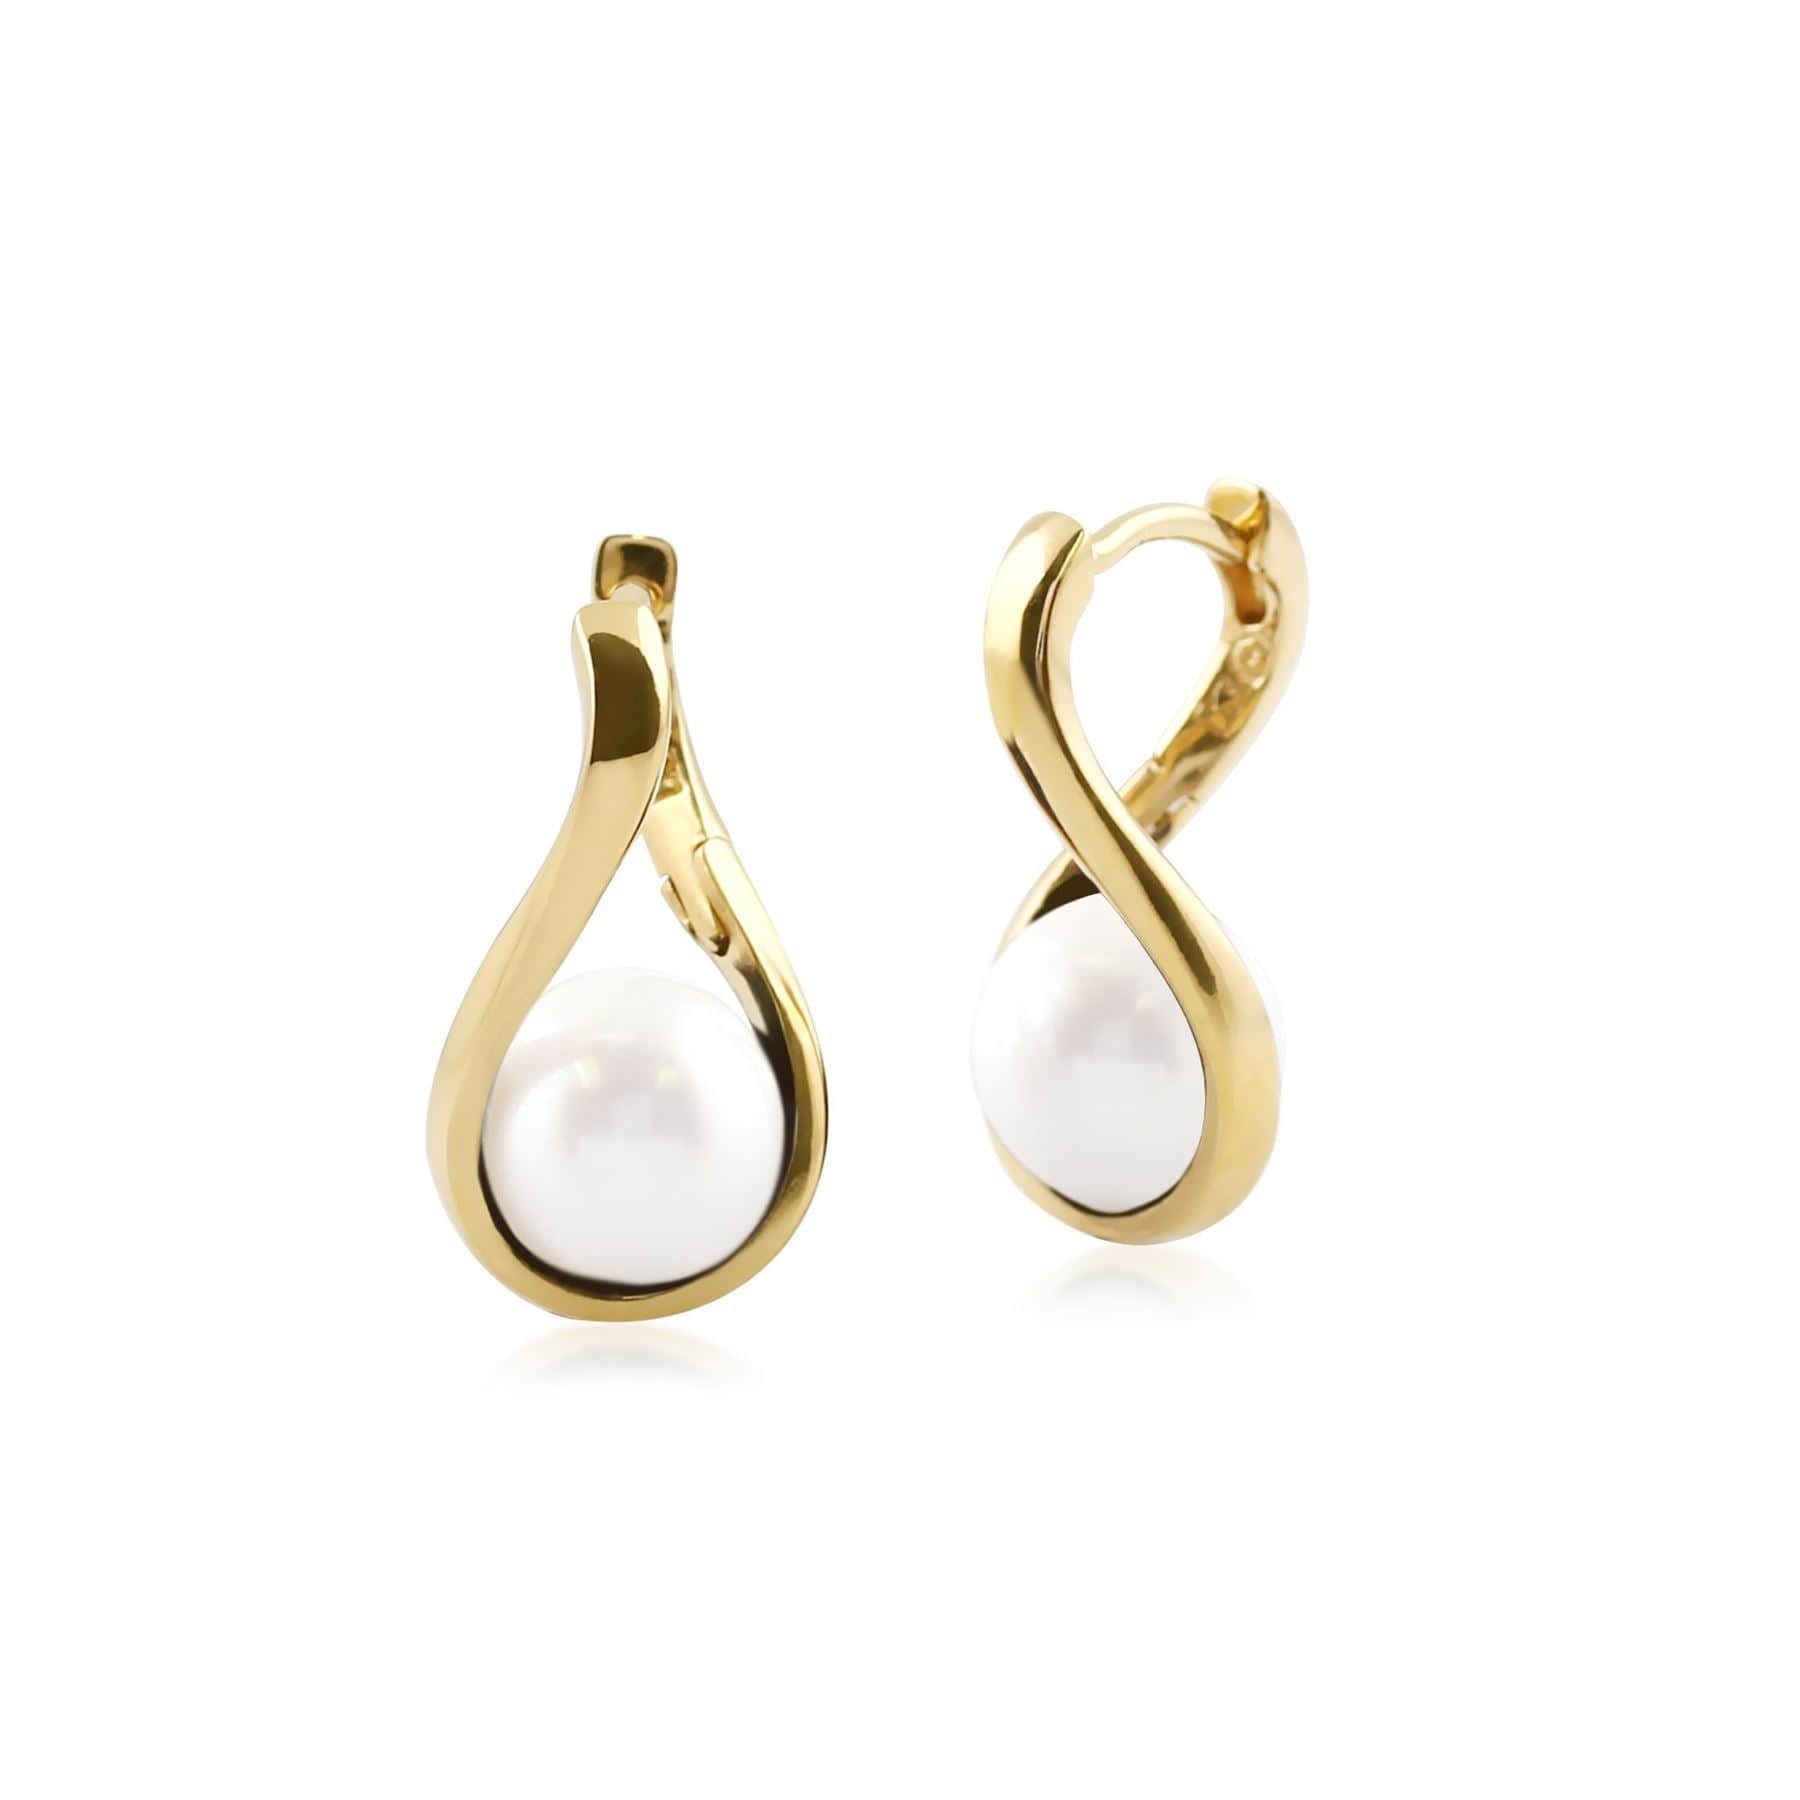 Kosmos White Agate Orb Earrings in Yellow Gold Plated Sterling Silver - Gemondo